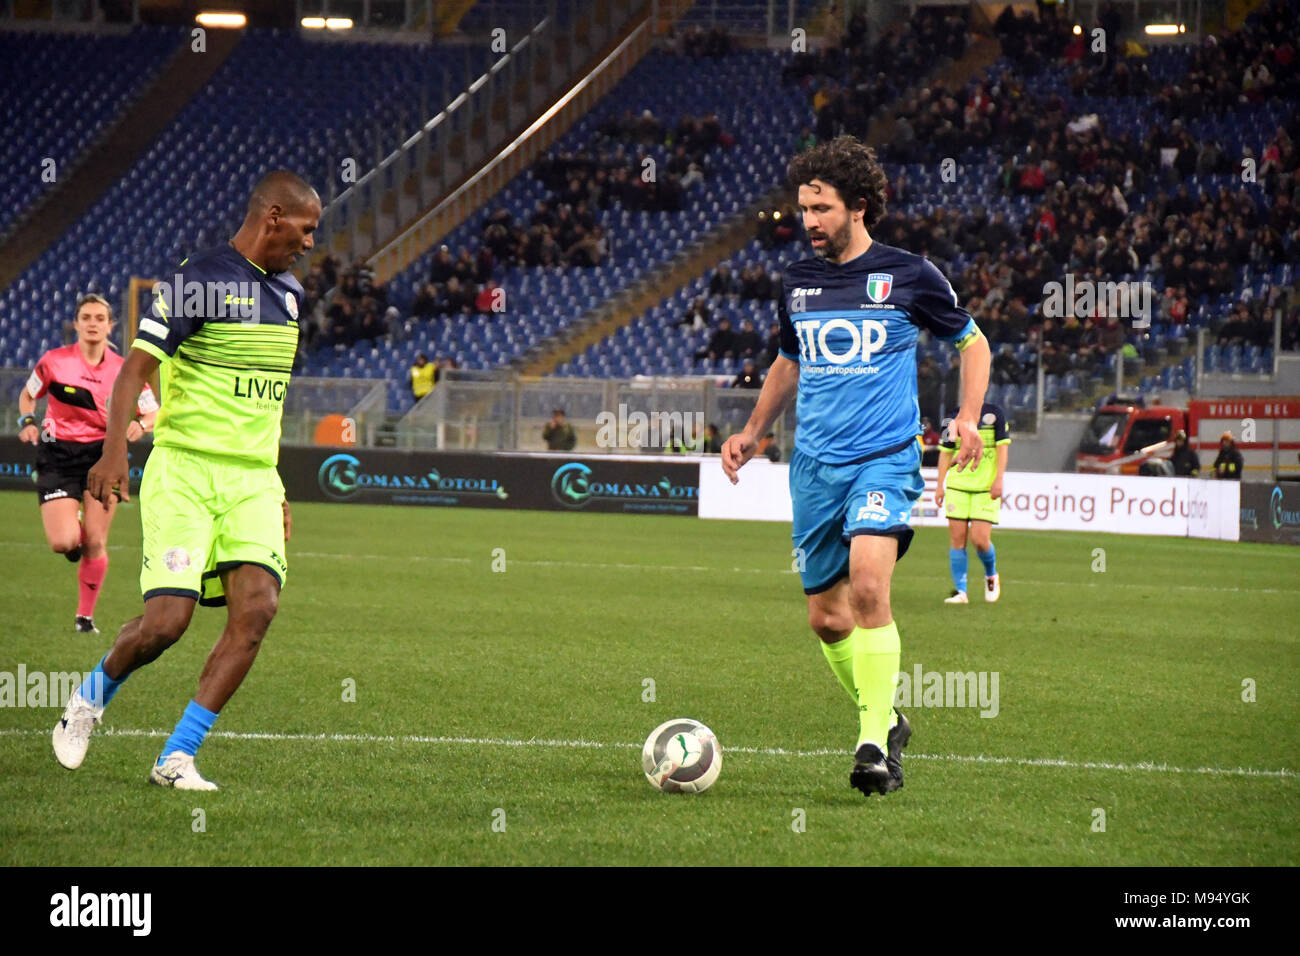 Rome Italy 21 March 2018 Stadio Olimpico - the mundial matchL, ITALY REST OF THE WORLD,, Damiano Tommasi and Aldair Credit: Giuseppe Andidero/Alamy Live News Stock Photo